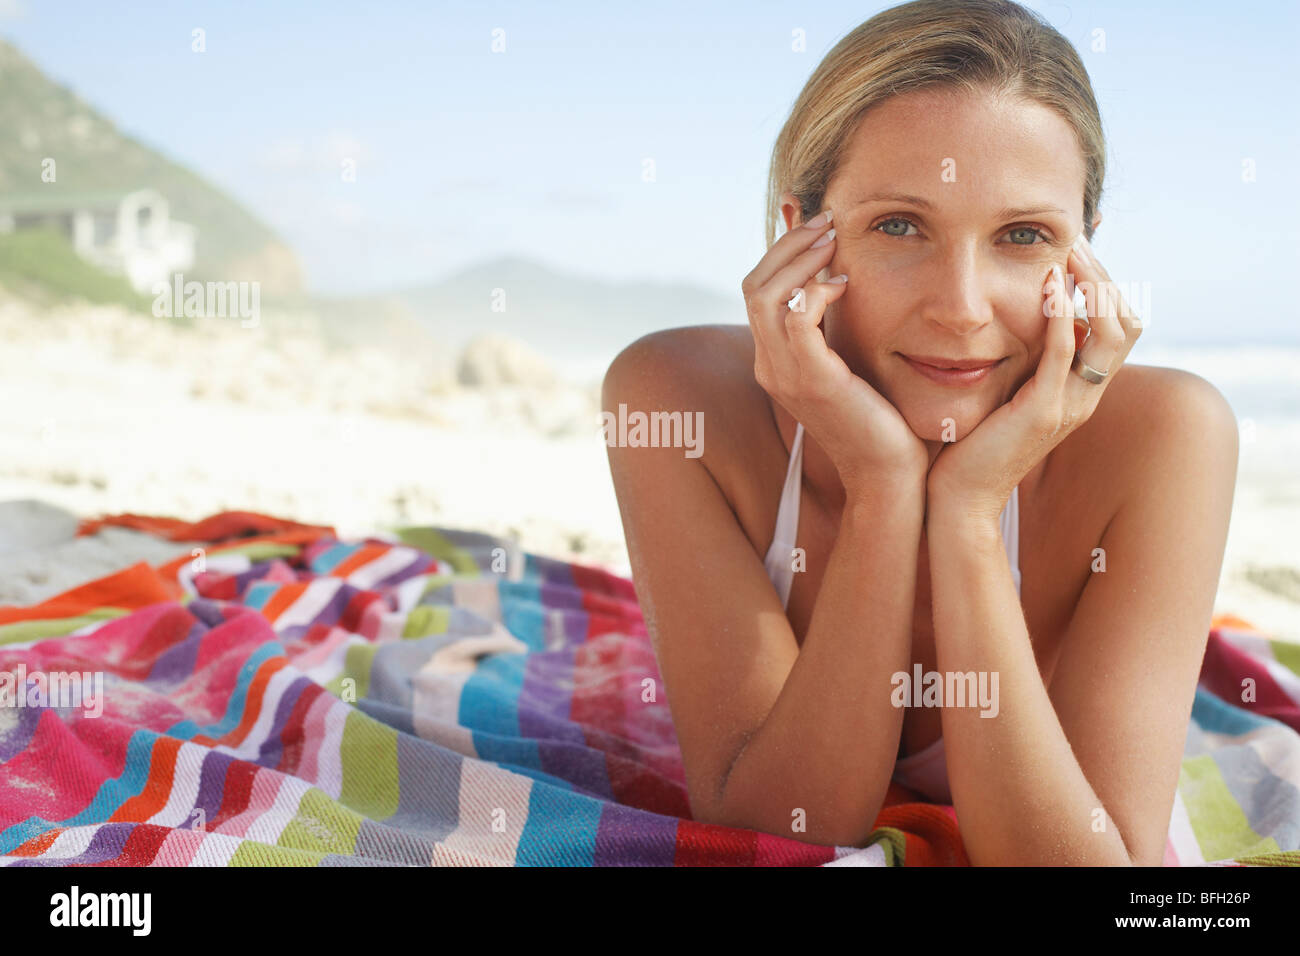 Woman Sunbathing on Beach Banque D'Images